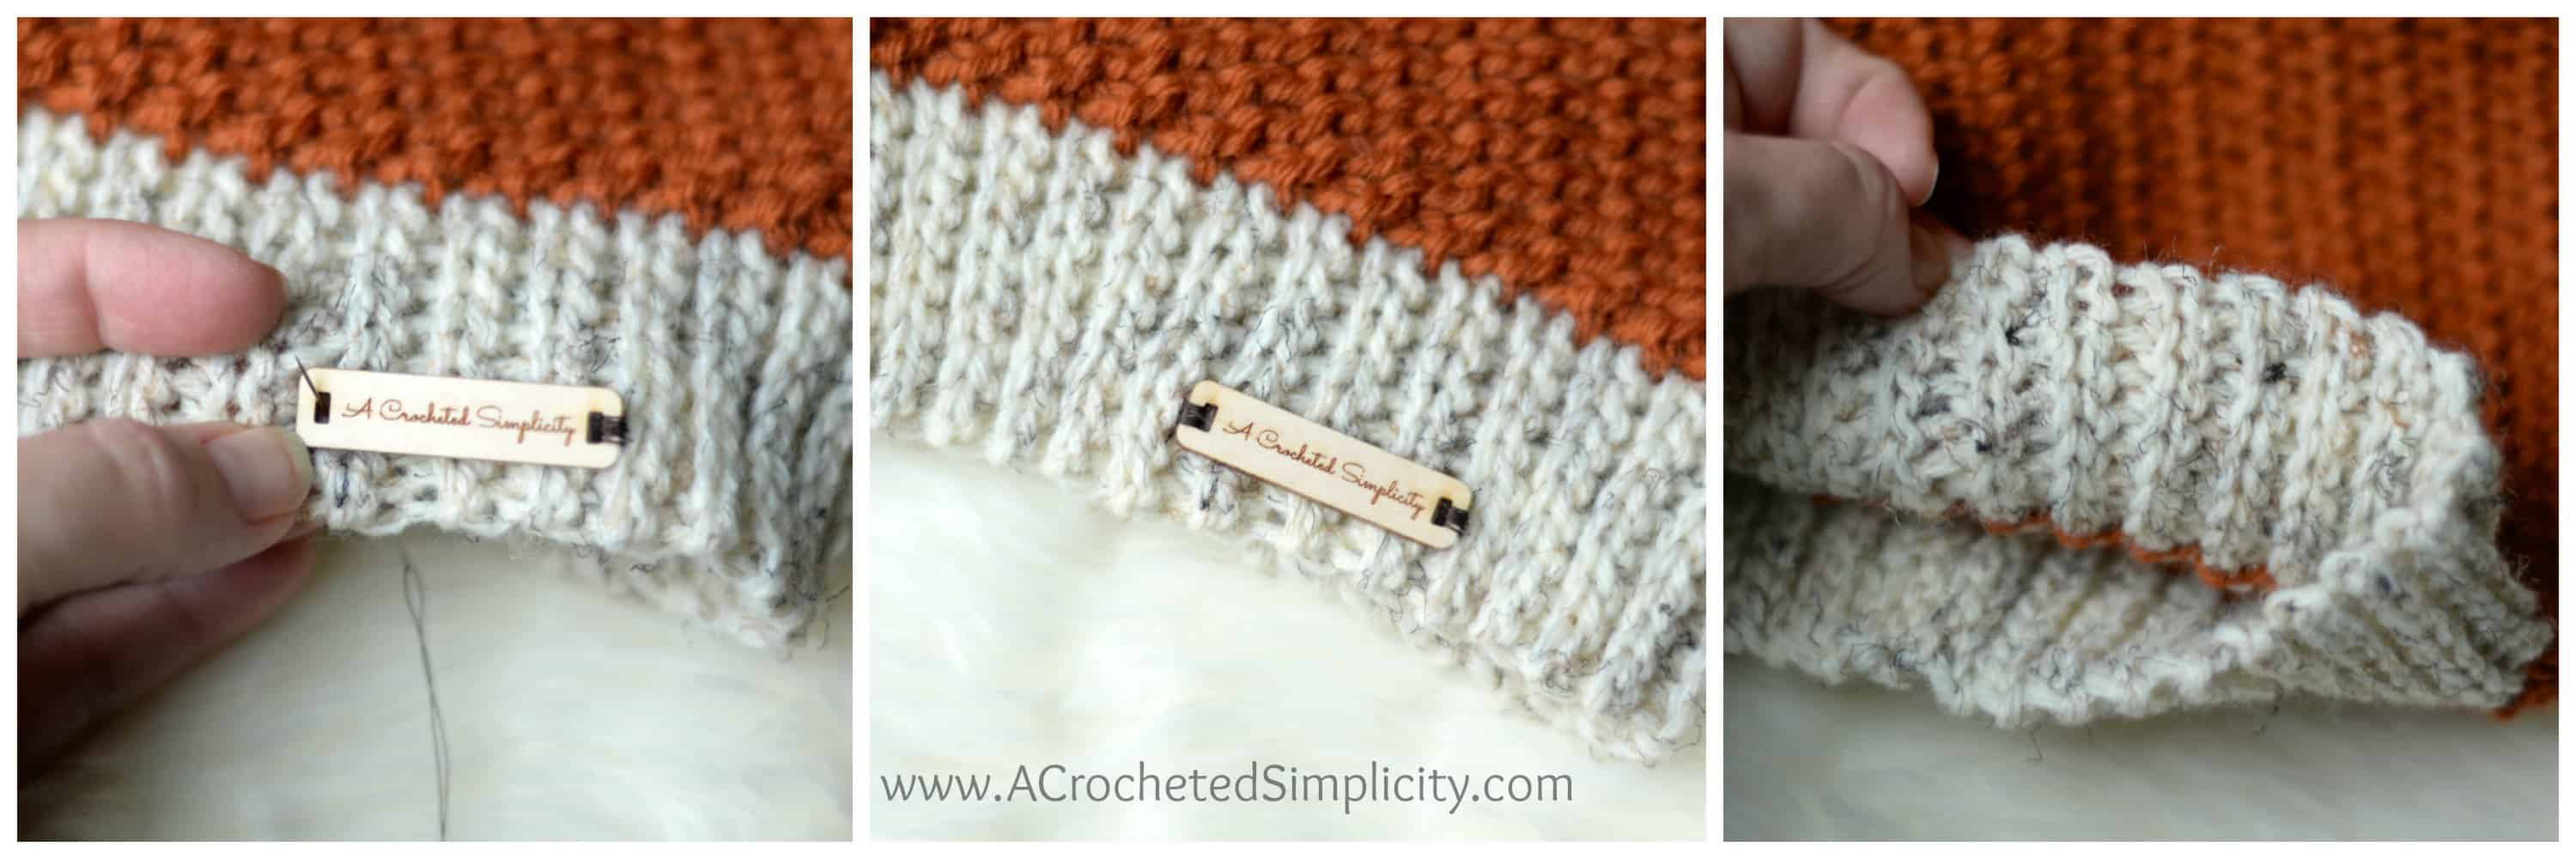 Personalize Your Crochet - How to Add Labels & Tags to your Crochet